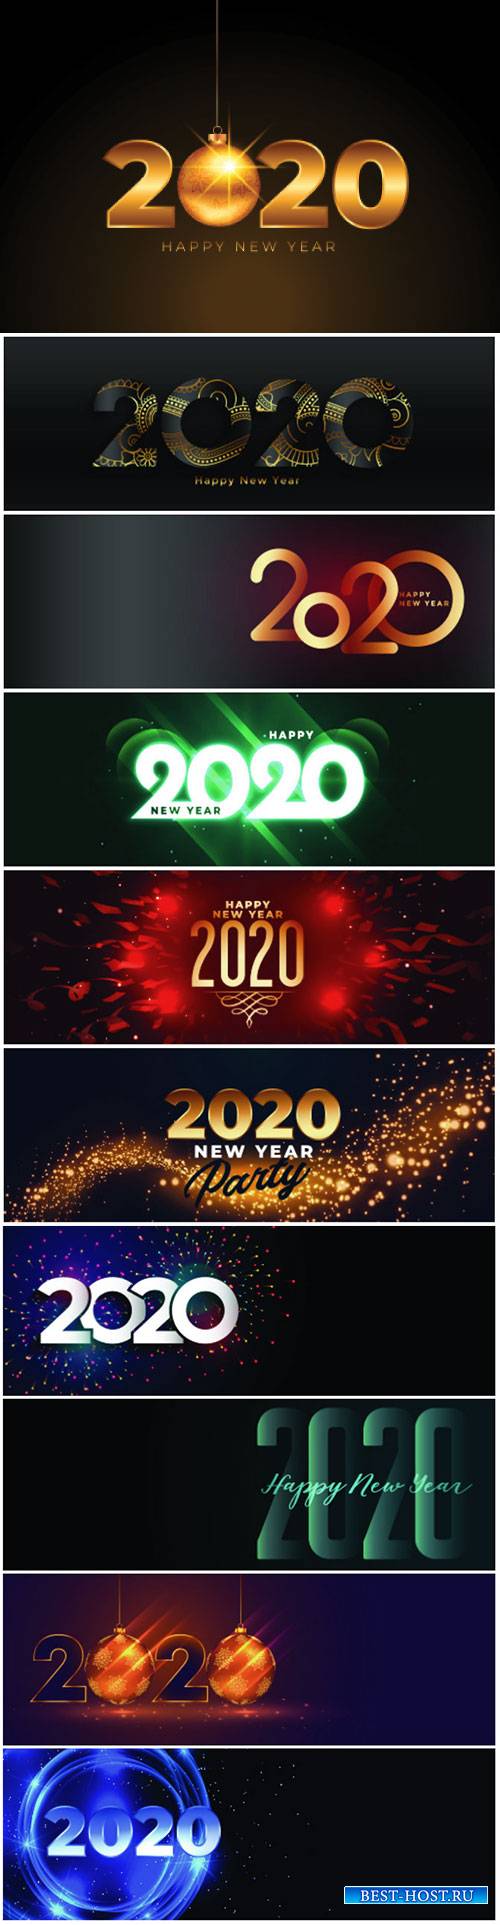 Happy new year 2020 golden background with christmas ball